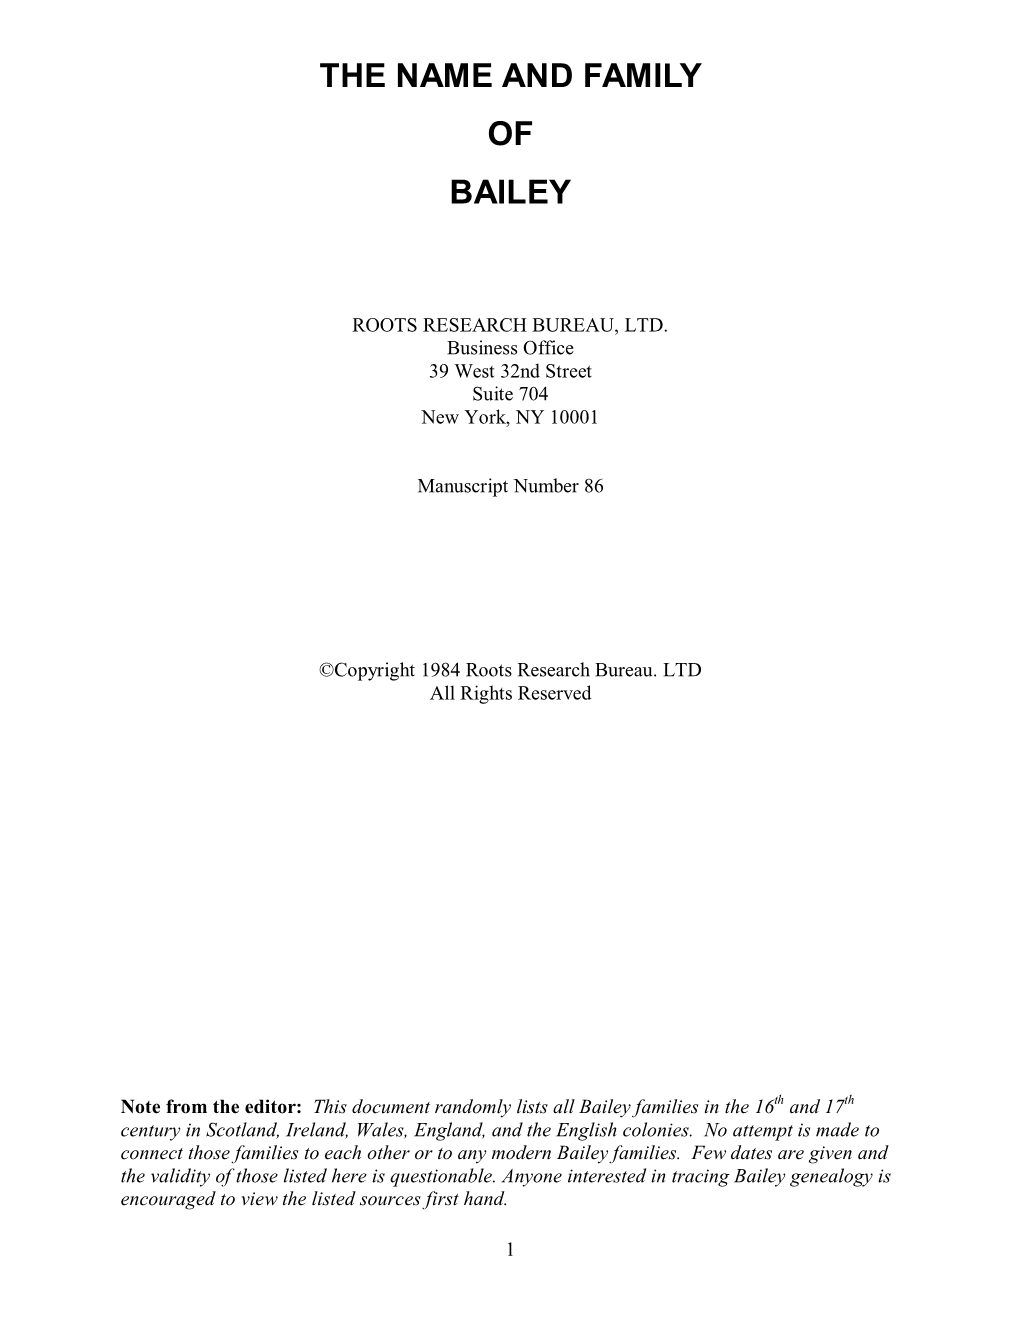 The Name and Family of Bailey